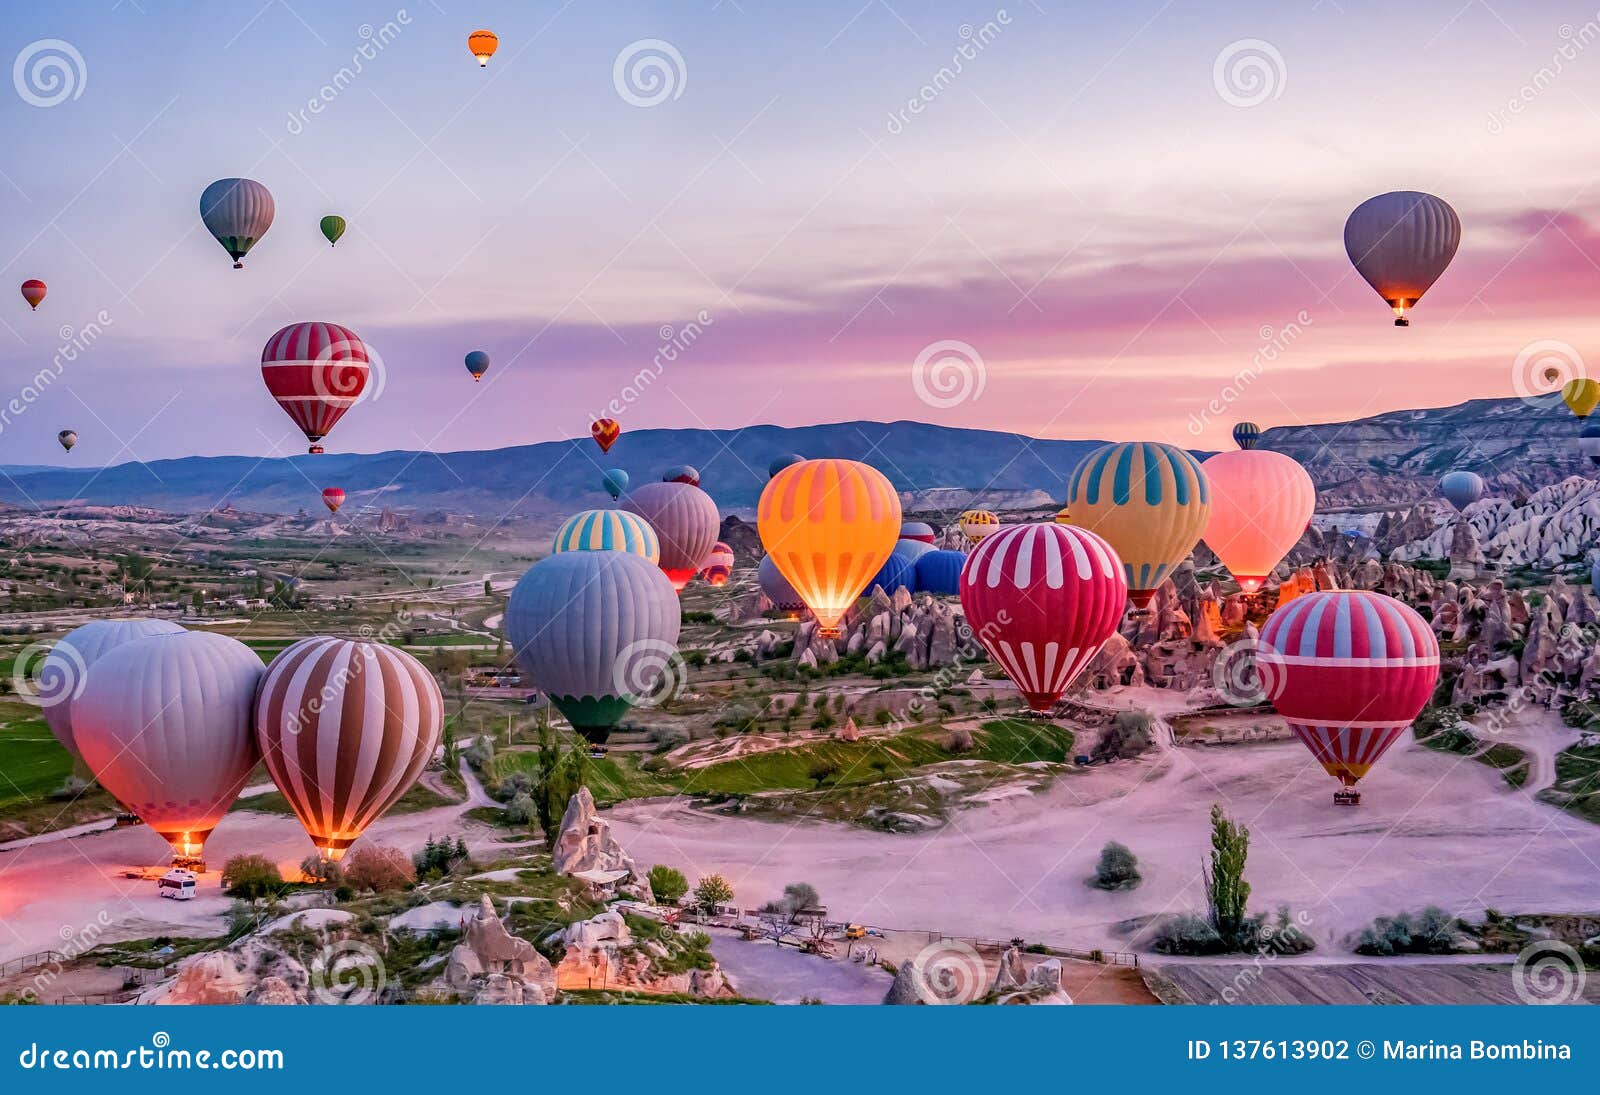 colorful hot air balloons before launch in goreme national park, cappadocia, turkey